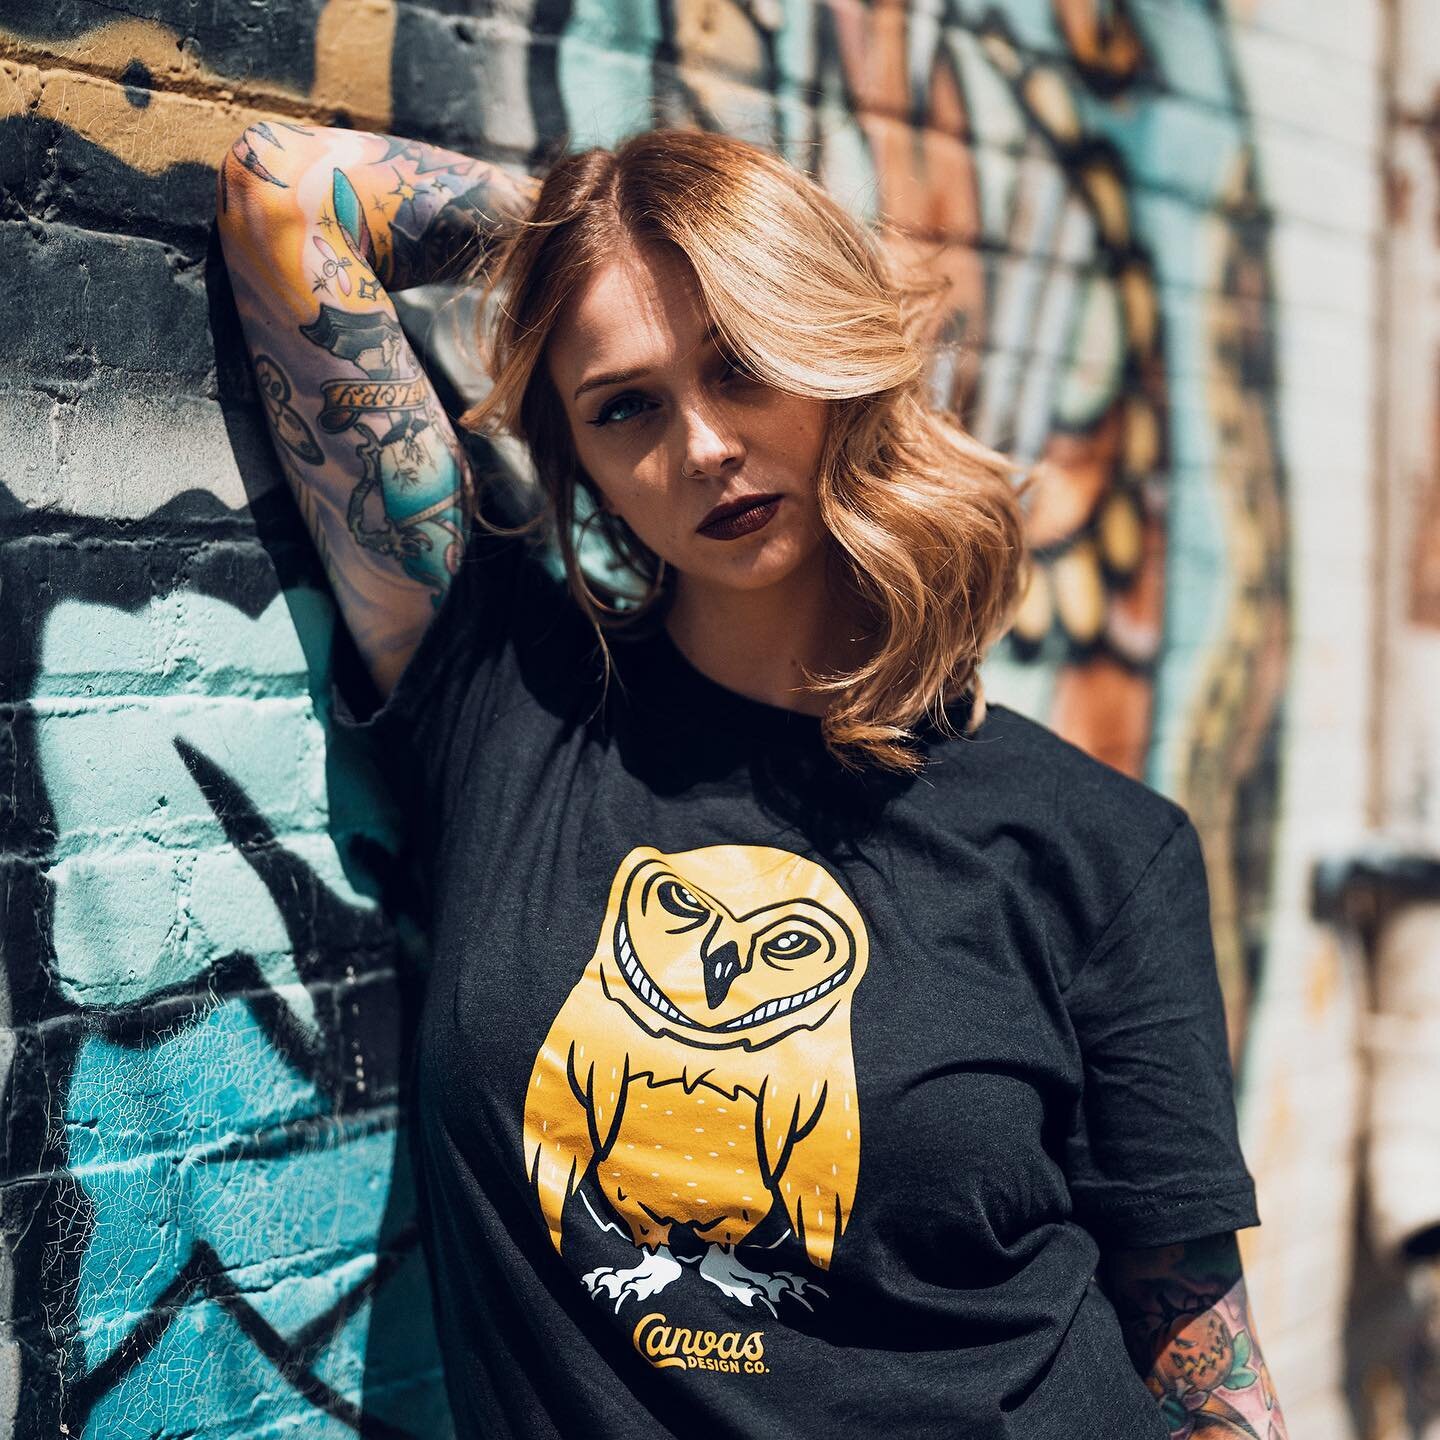 Inventory sale! Running low on some merch items so we lowered some pricing on select item.
Looking for your new favorite shirt, sticker, or hat? We&rsquo;ve got you covered! 
Link in bio!
#canvasdesigncompany #owl #staycreative #shirtdesign #design #